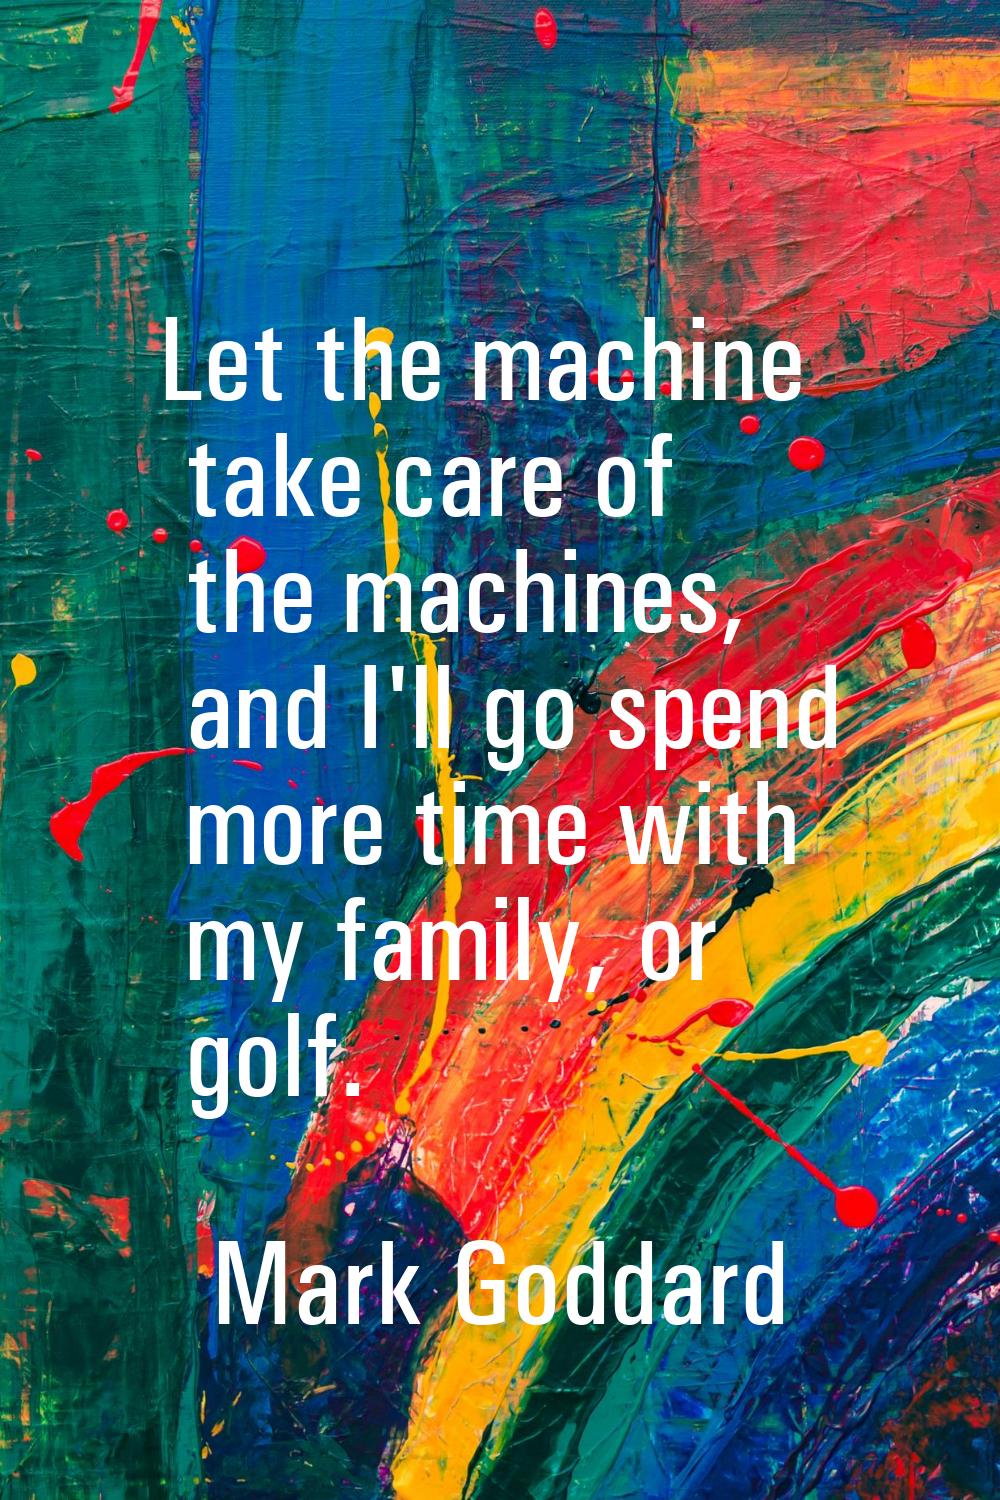 Let the machine take care of the machines, and I'll go spend more time with my family, or golf.